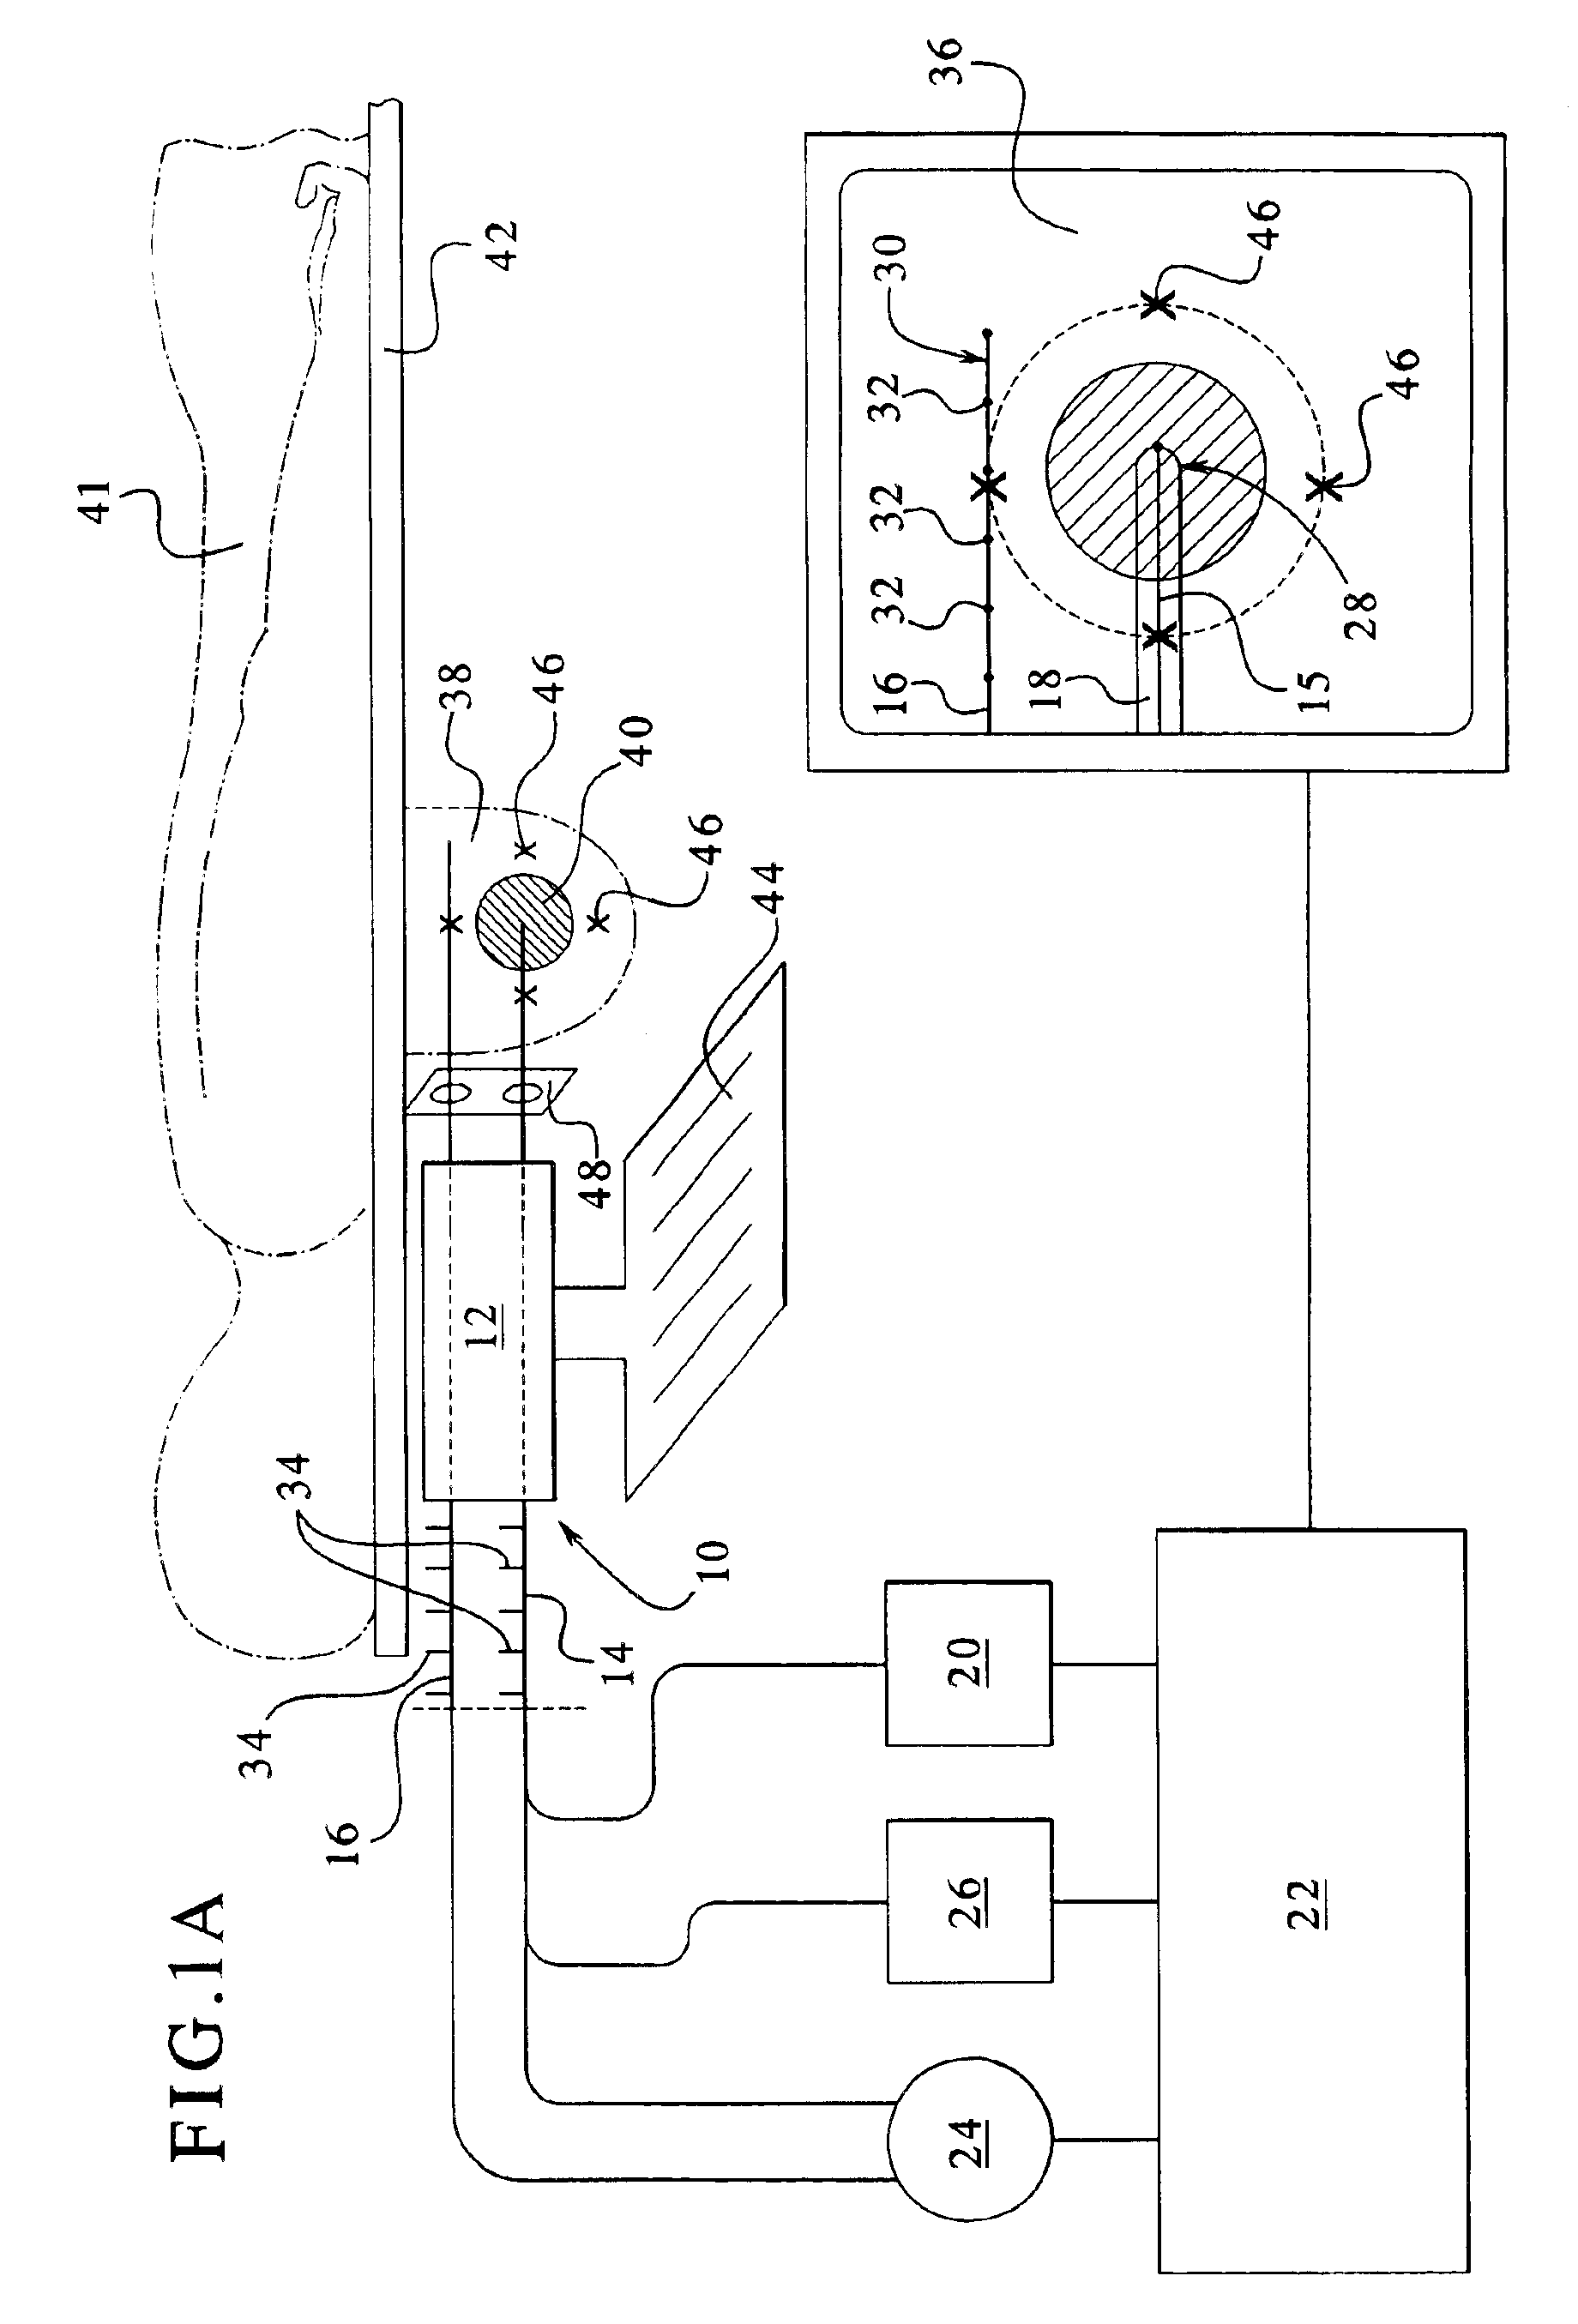 Apparatus and method for delivering ablative laser energy and determining the volume of tumor mass destroyed